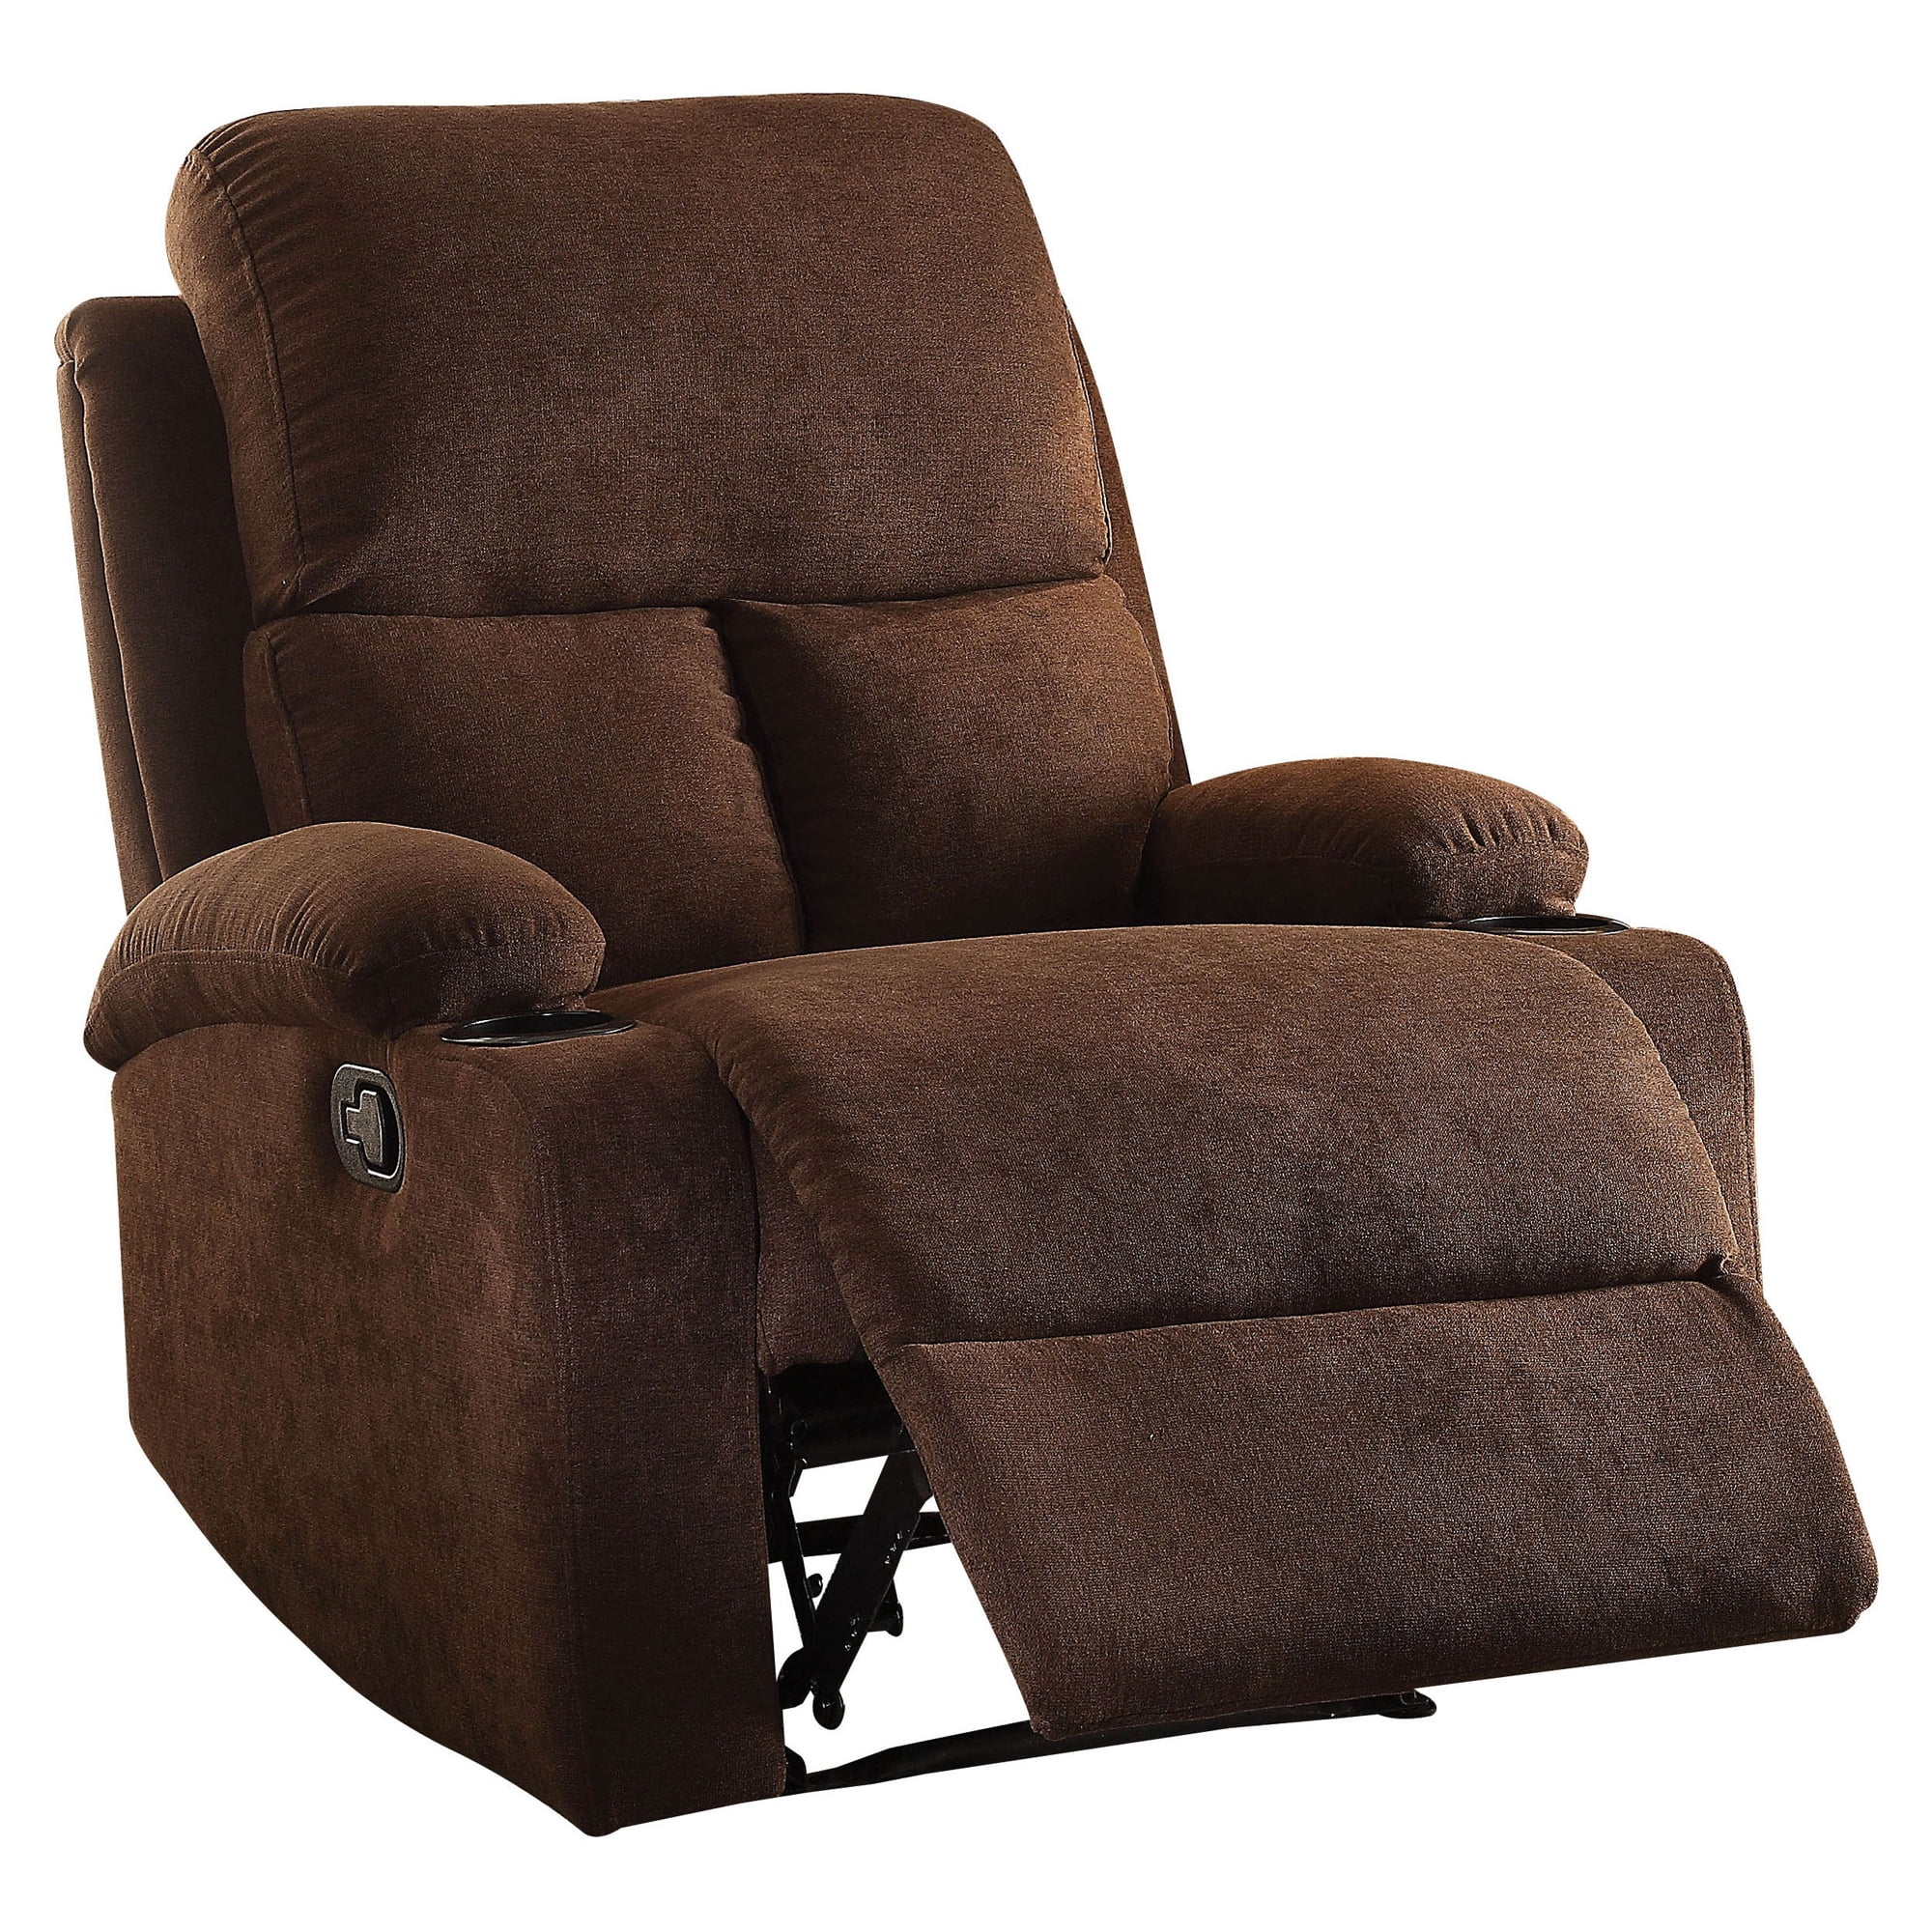 Picture of Acme Furniture Industry 59547 Rosia Recliner, Chocolate